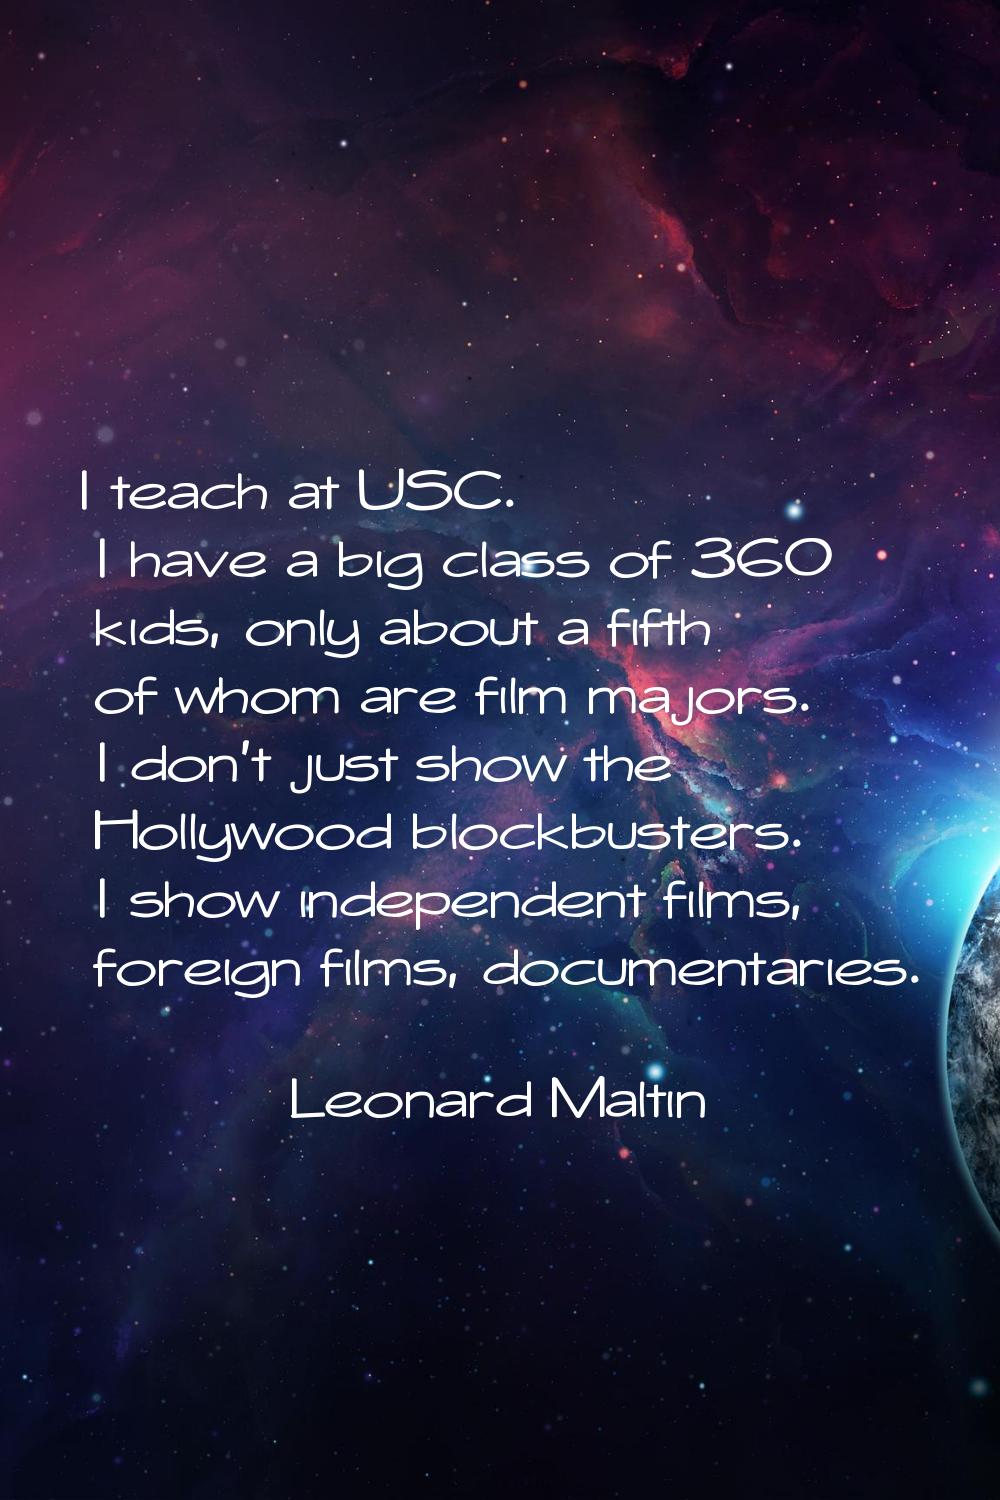 I teach at USC. I have a big class of 360 kids, only about a fifth of whom are film majors. I don't